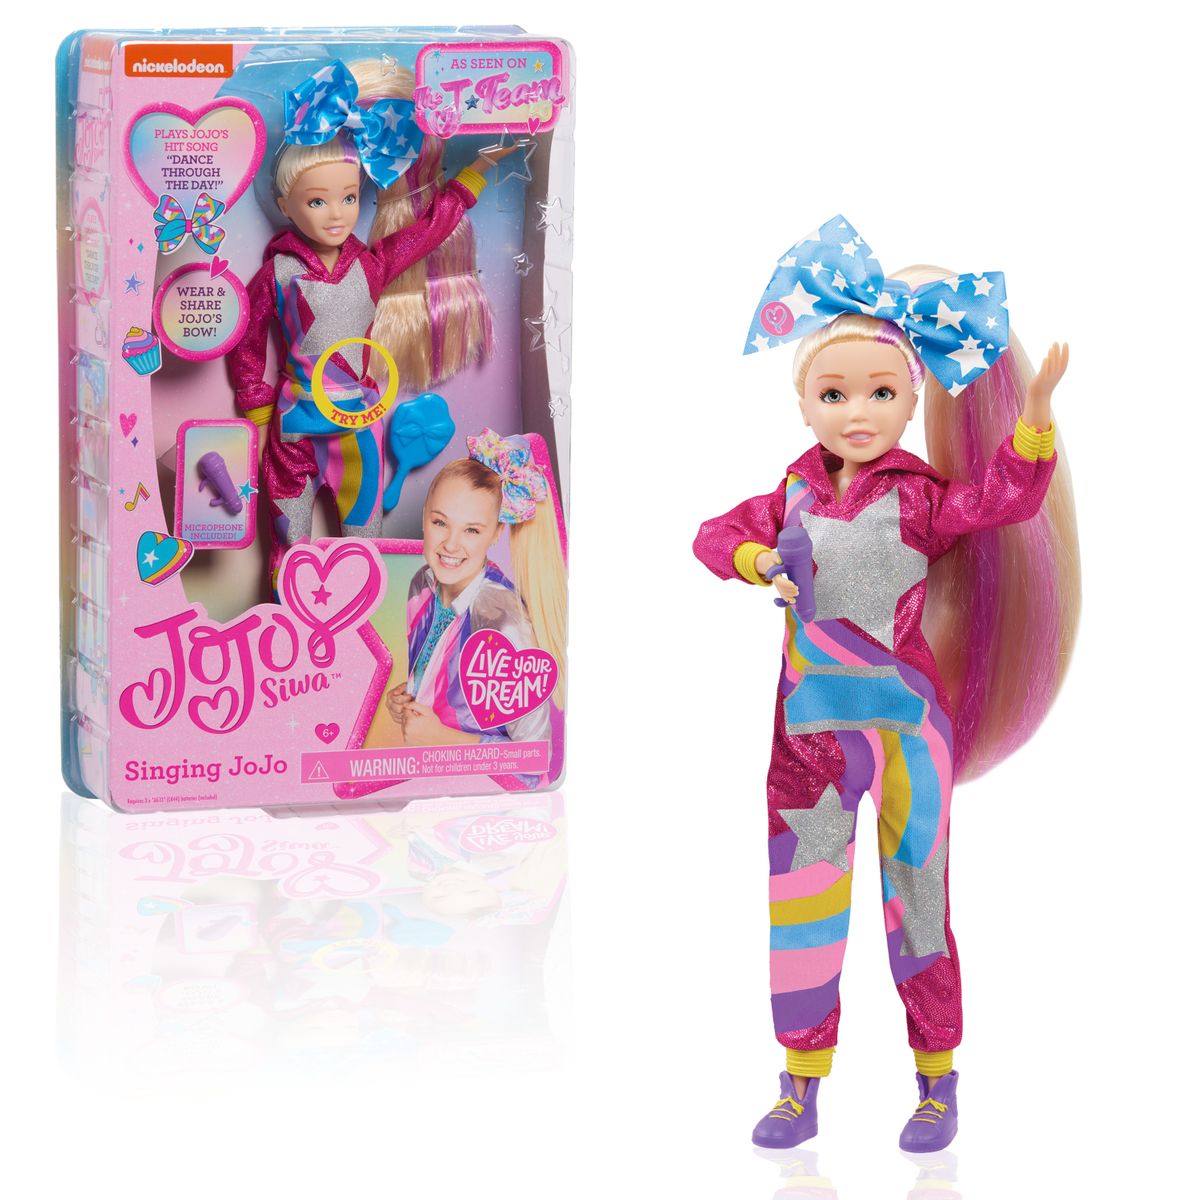 [RDY] [送料無料] Just Play JoJo Siwa J-Team Singing 10-inch Fashion Doll, Dance Through the Day, Kids Toy for Ages 6 up [楽天海外通販] | Just Play JoJo Siwa J-Team Singing 10-inch Fashion Doll, Dance Through the Day, Kids Toys for Ages 6 up